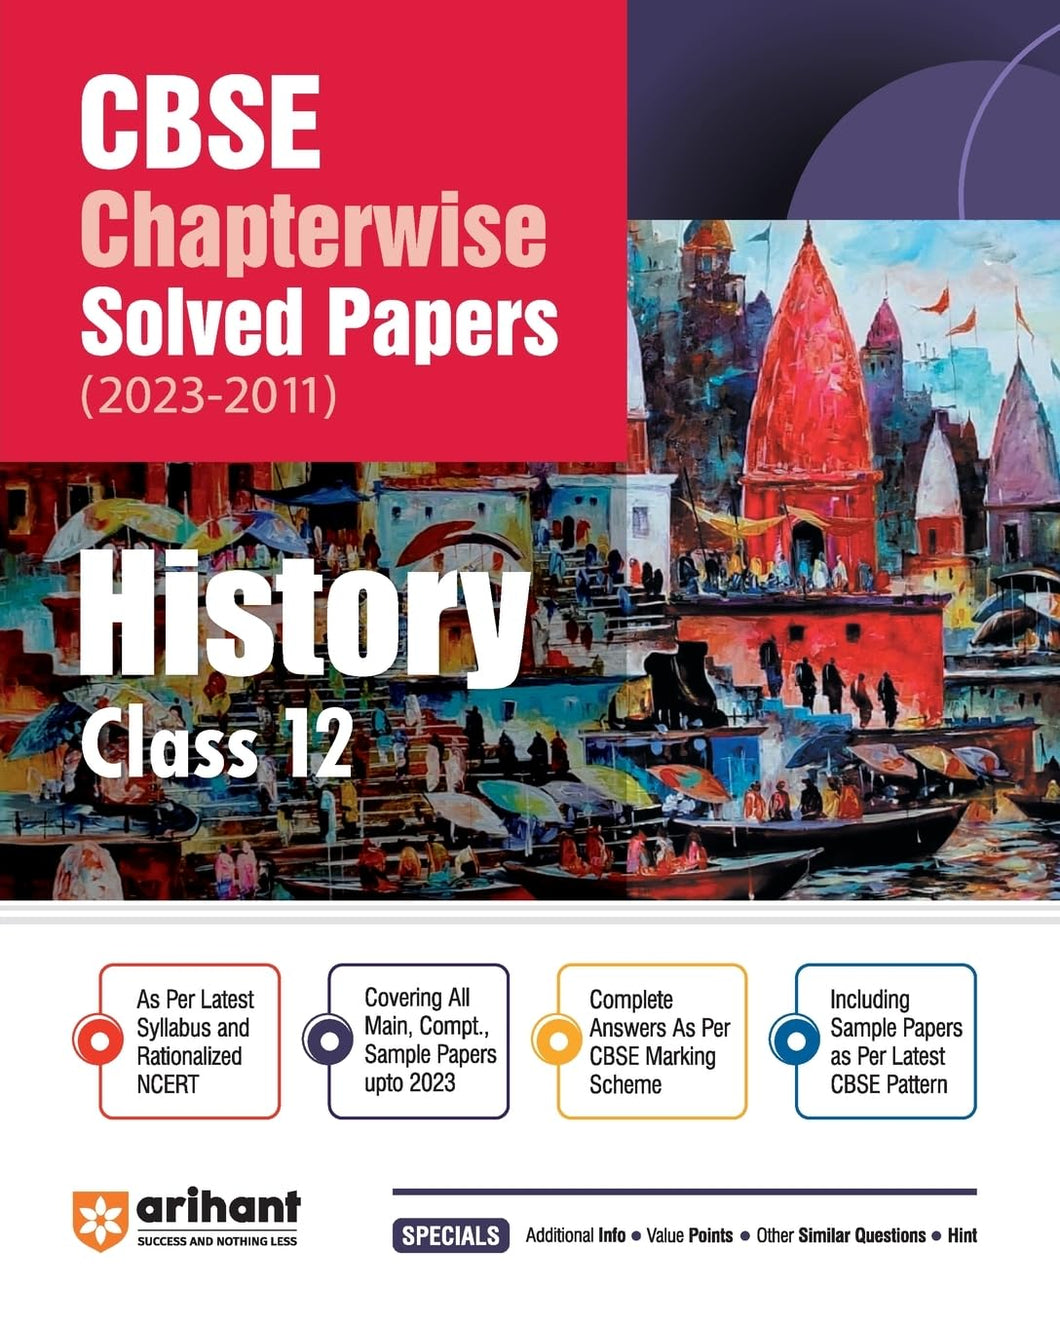 CBSE Chapterwise Solved Papers 2023-2011 History Class 12th